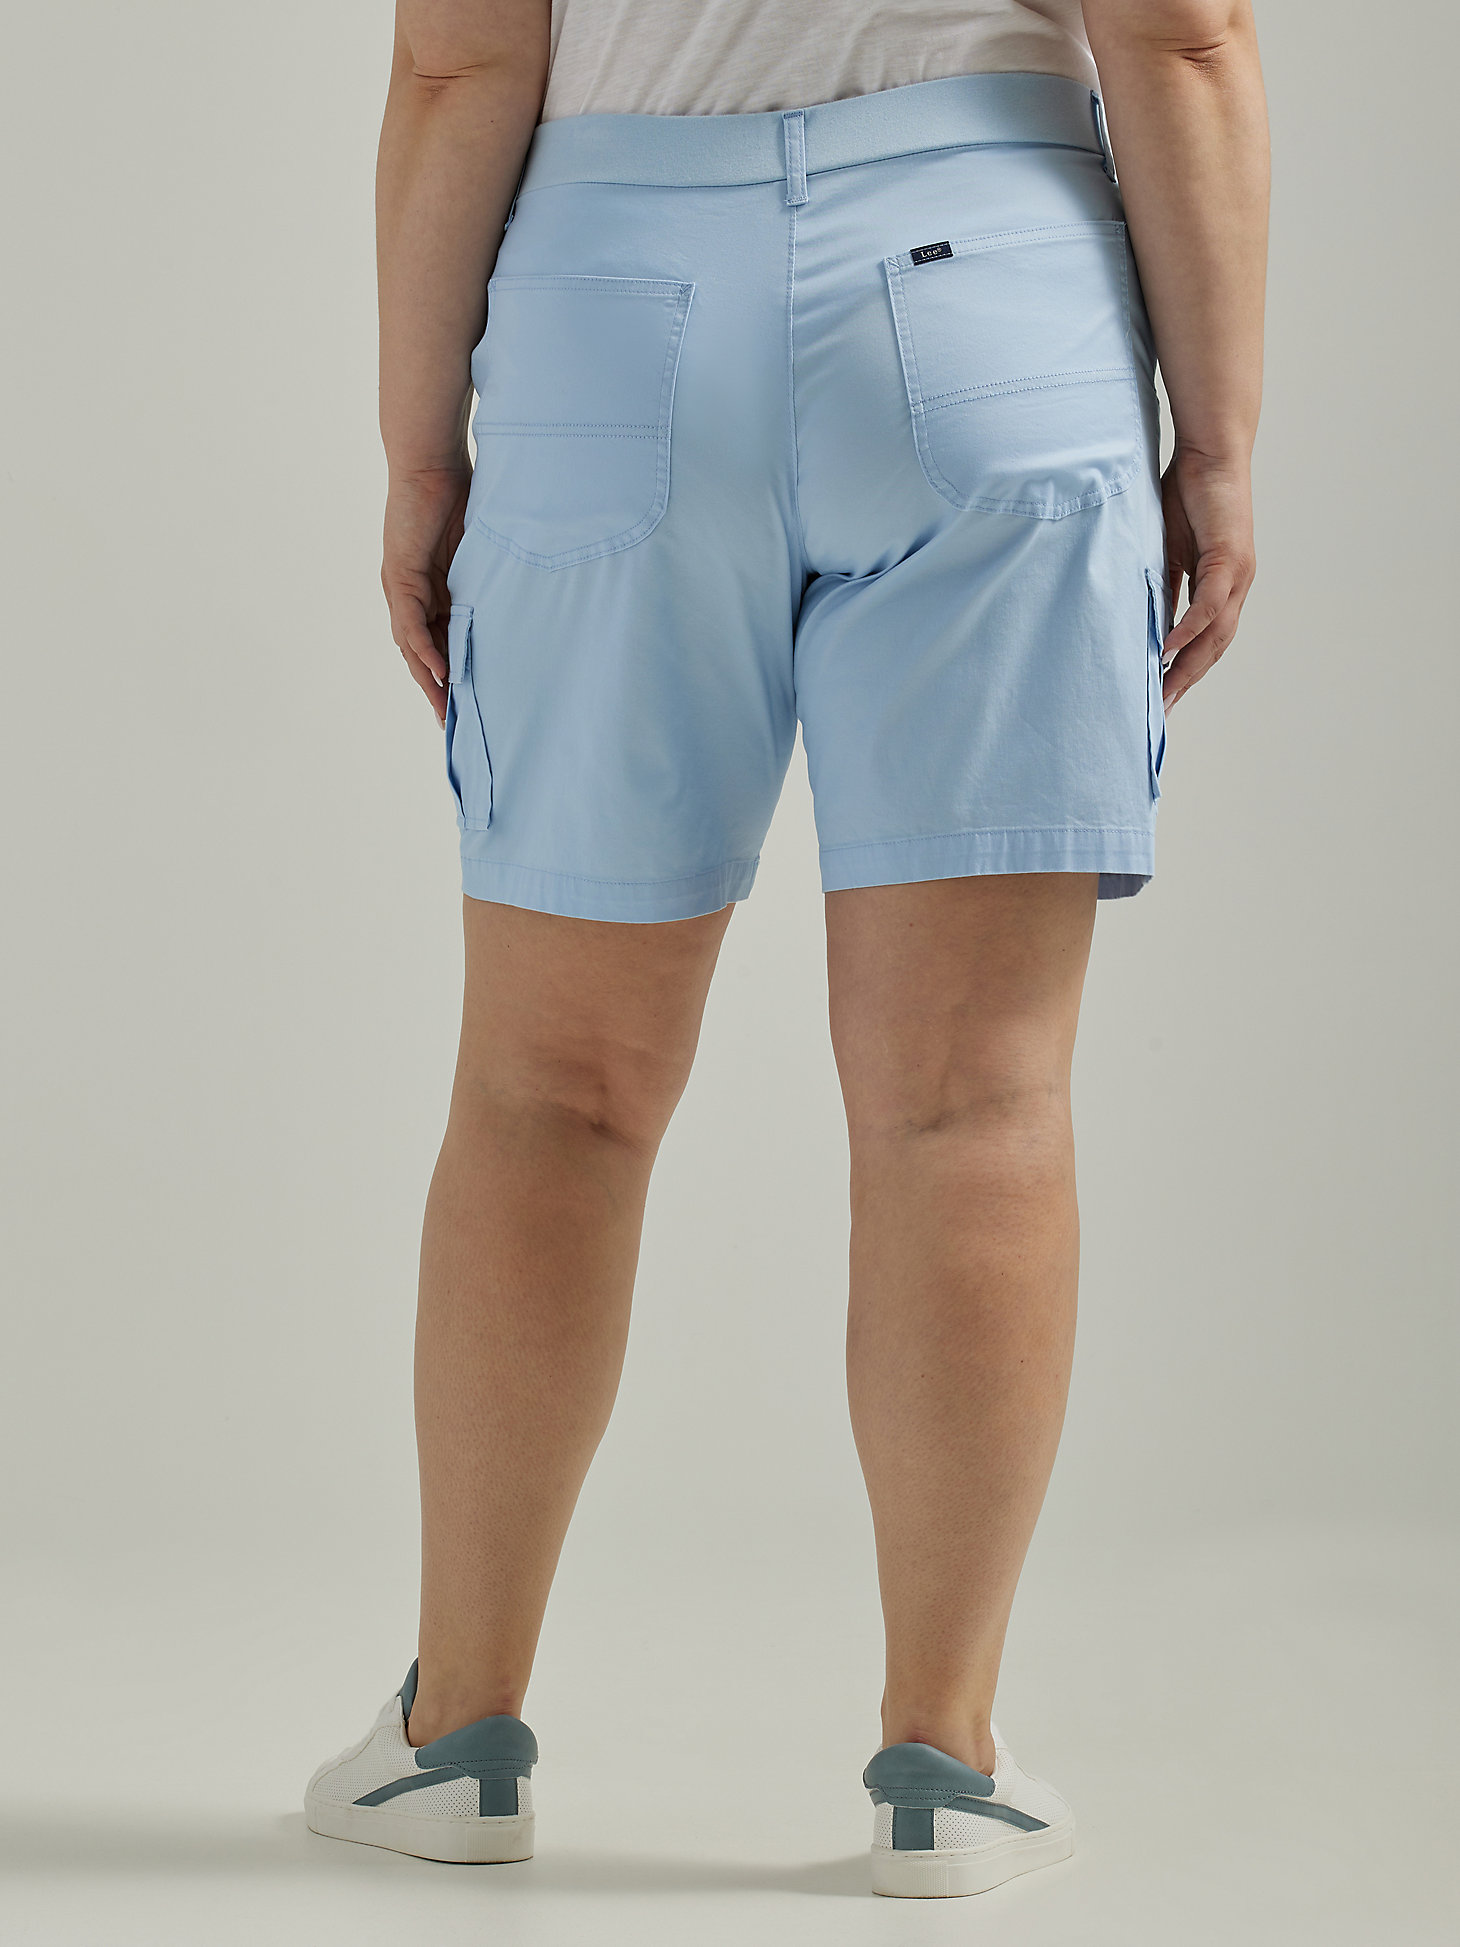 Women's Ultra Lux with Flex-to-Go Relaxed Cargo Bermuda (Plus) in Blue Sky alternative view 1